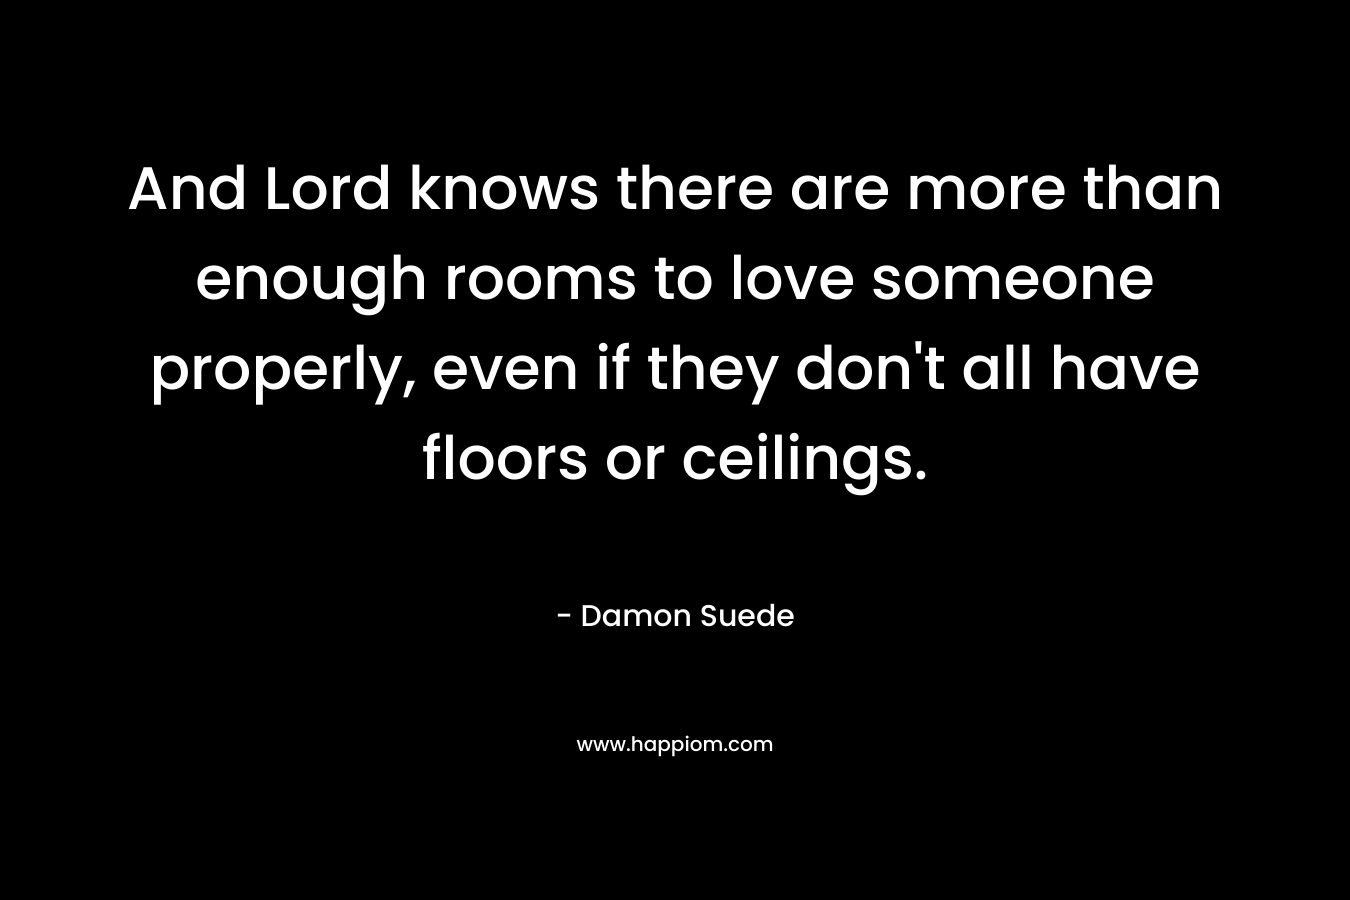 And Lord knows there are more than enough rooms to love someone properly, even if they don’t all have floors or ceilings. – Damon Suede